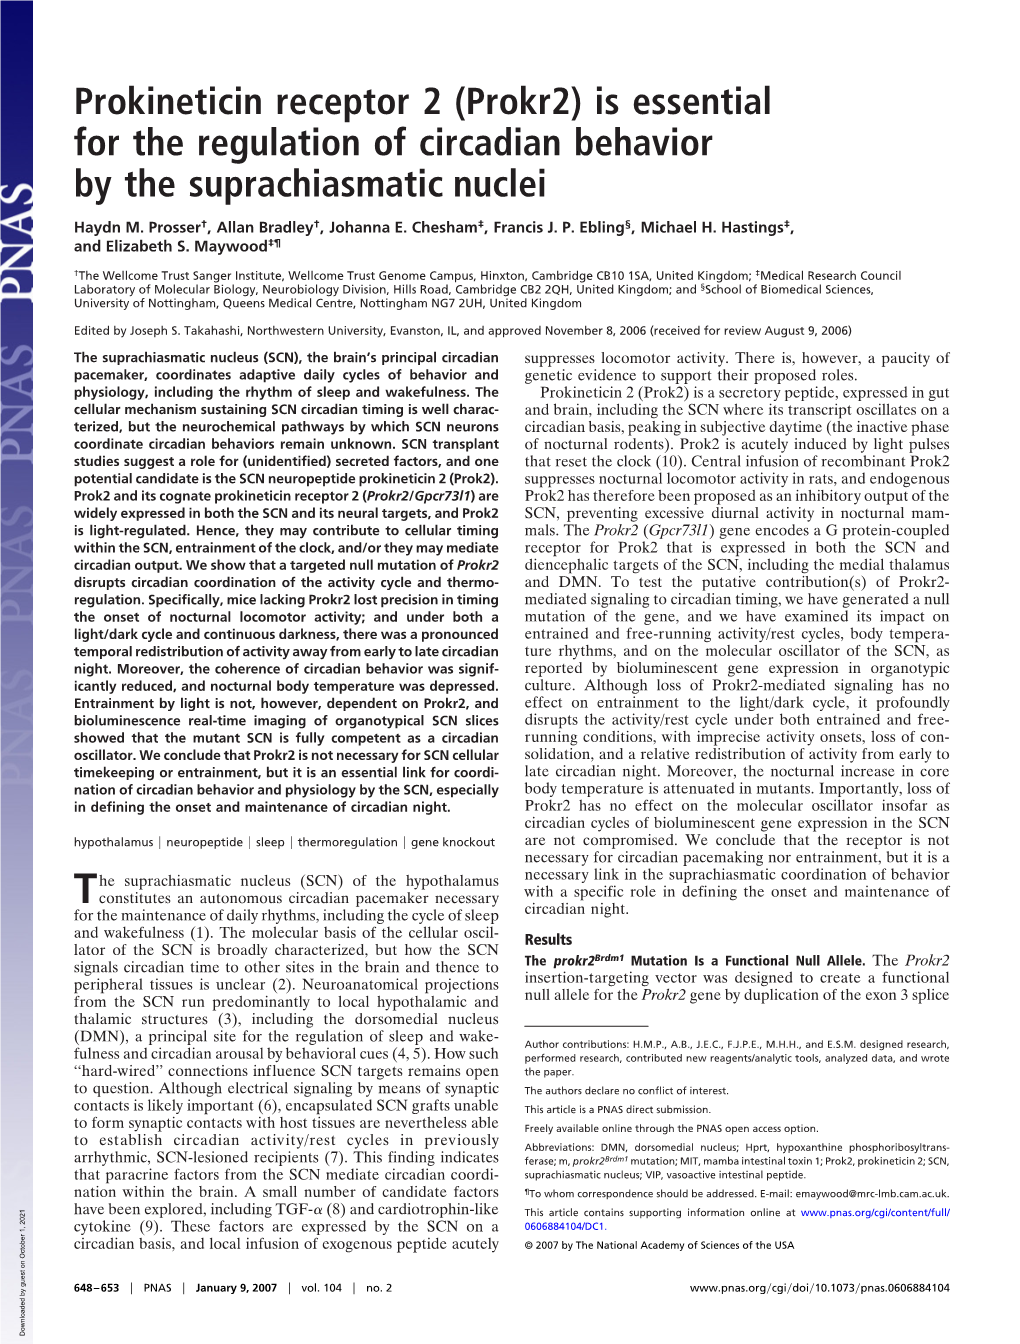 Prokineticin Receptor 2 (Prokr2) Is Essential for the Regulation of Circadian Behavior by the Suprachiasmatic Nuclei